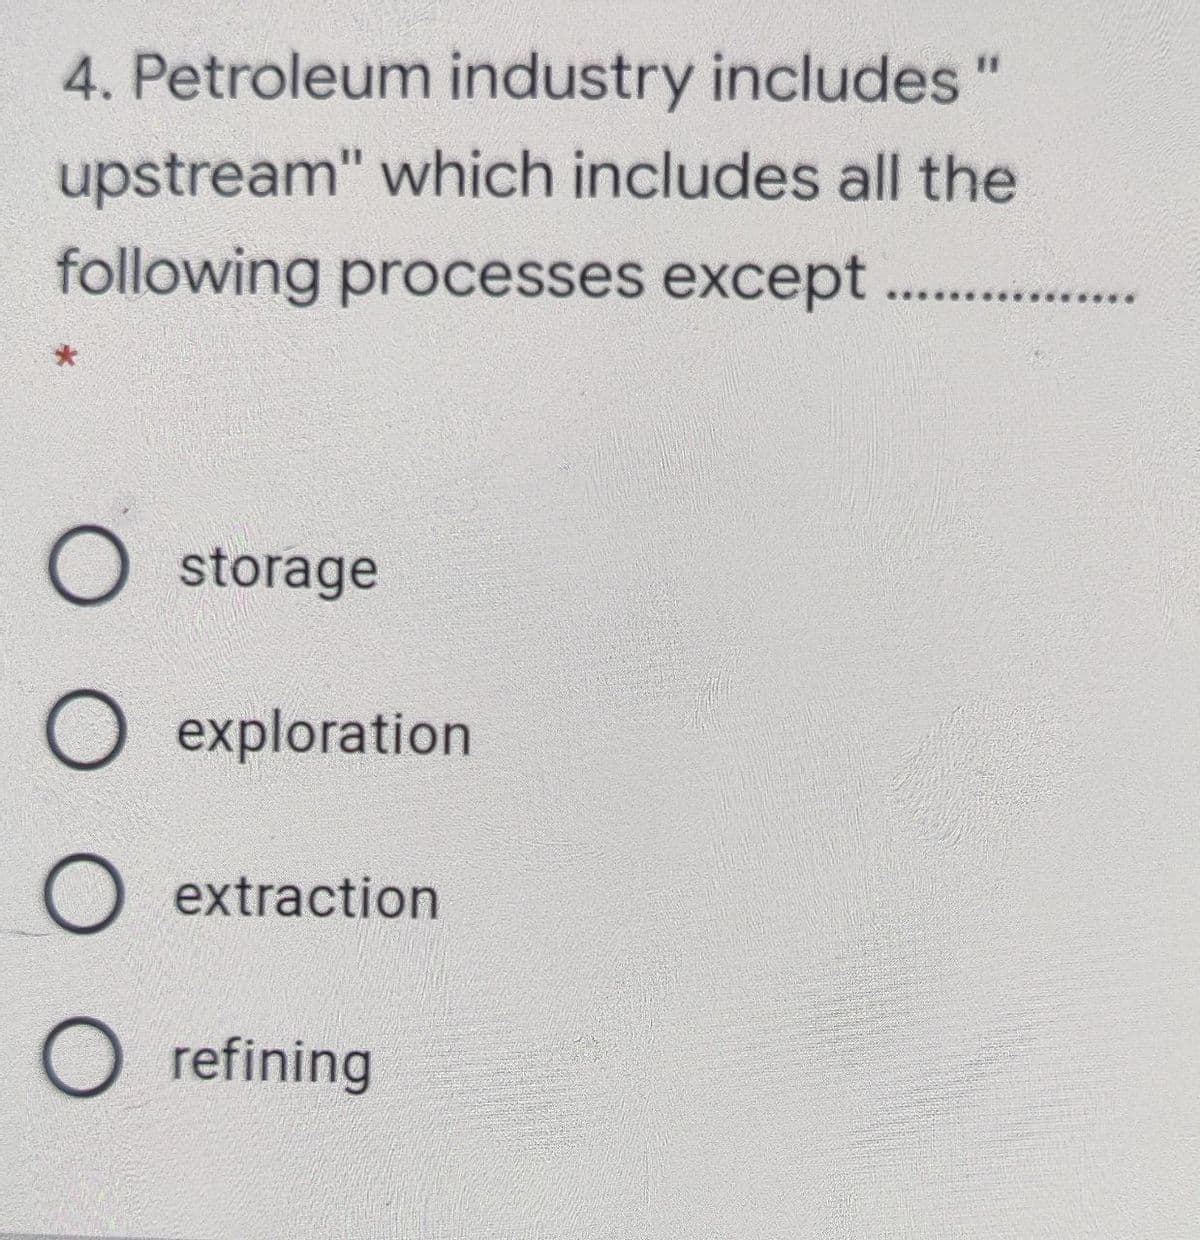 4. Petroleum industry includes
upstream" which includes all the
following processes except ..
O storage
O exploration
O extraction
O refining
